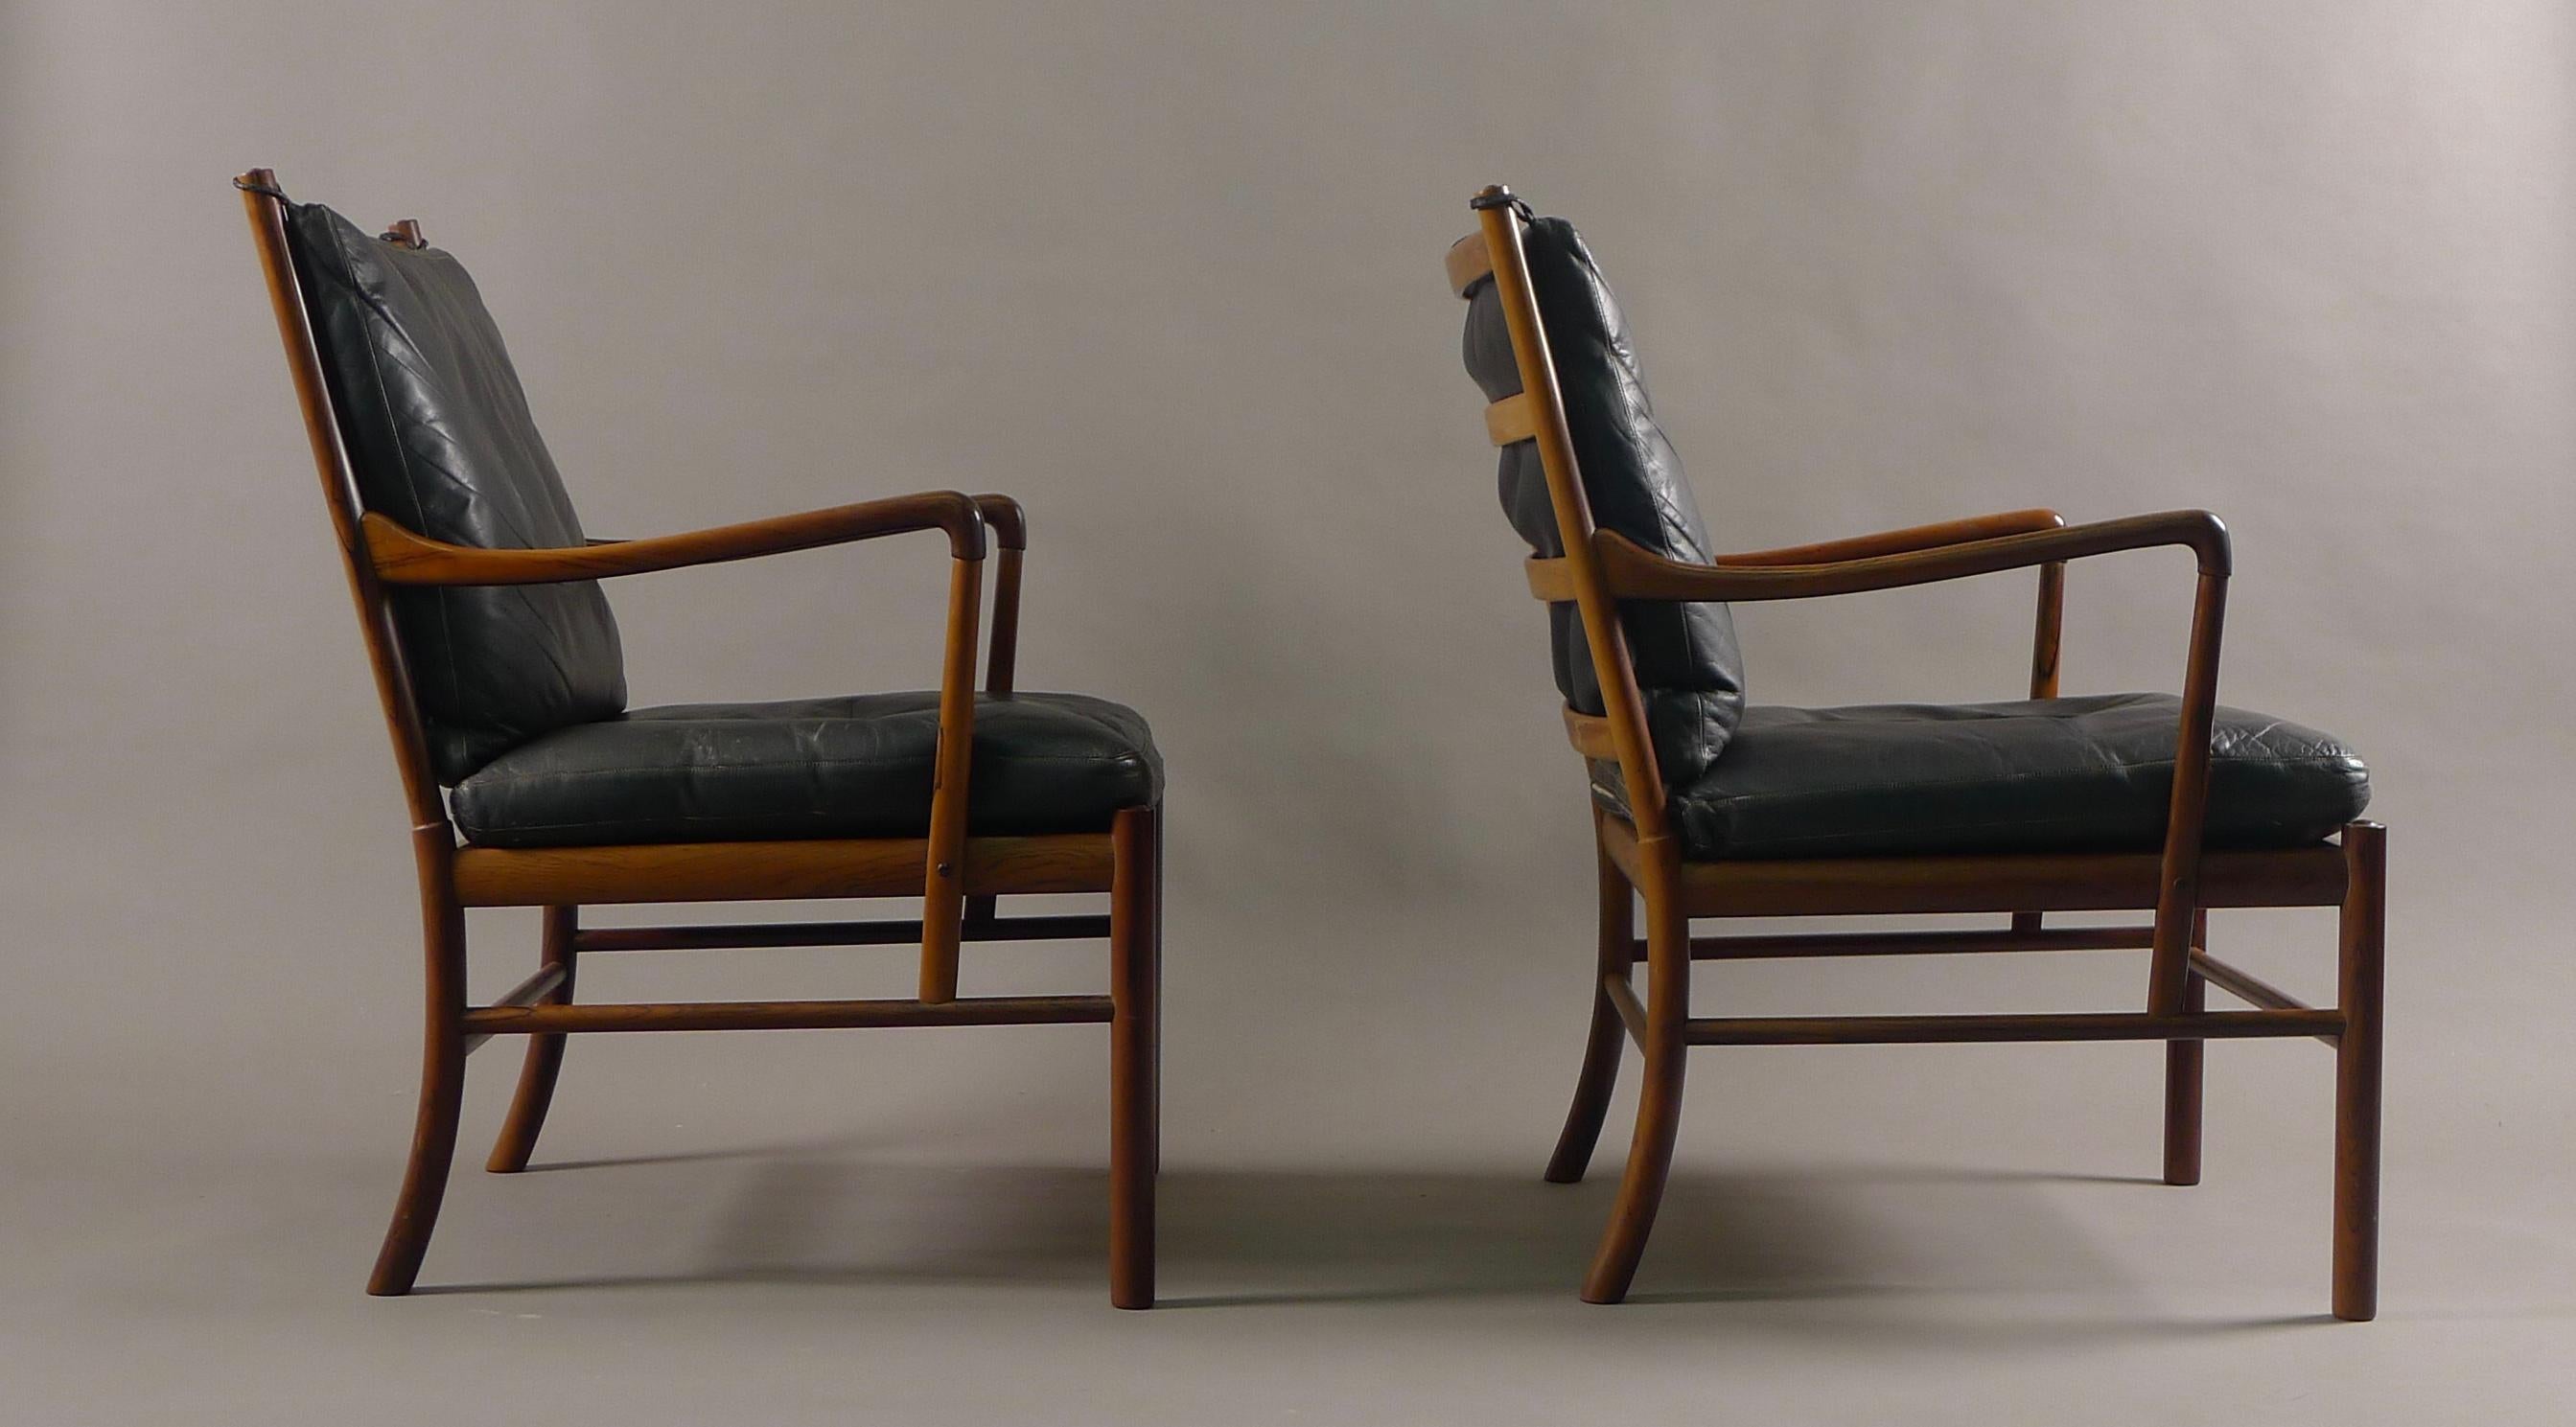 Ole Wanscher for Poul Jeppesens, Mobelfabrik, Denmark, model no. 149, the Colonial chair, designed circa 1950. 

This pair in Brazilian Rosewood with very nice graining to the timber. Original black leather cushions with feather pads, woven cane